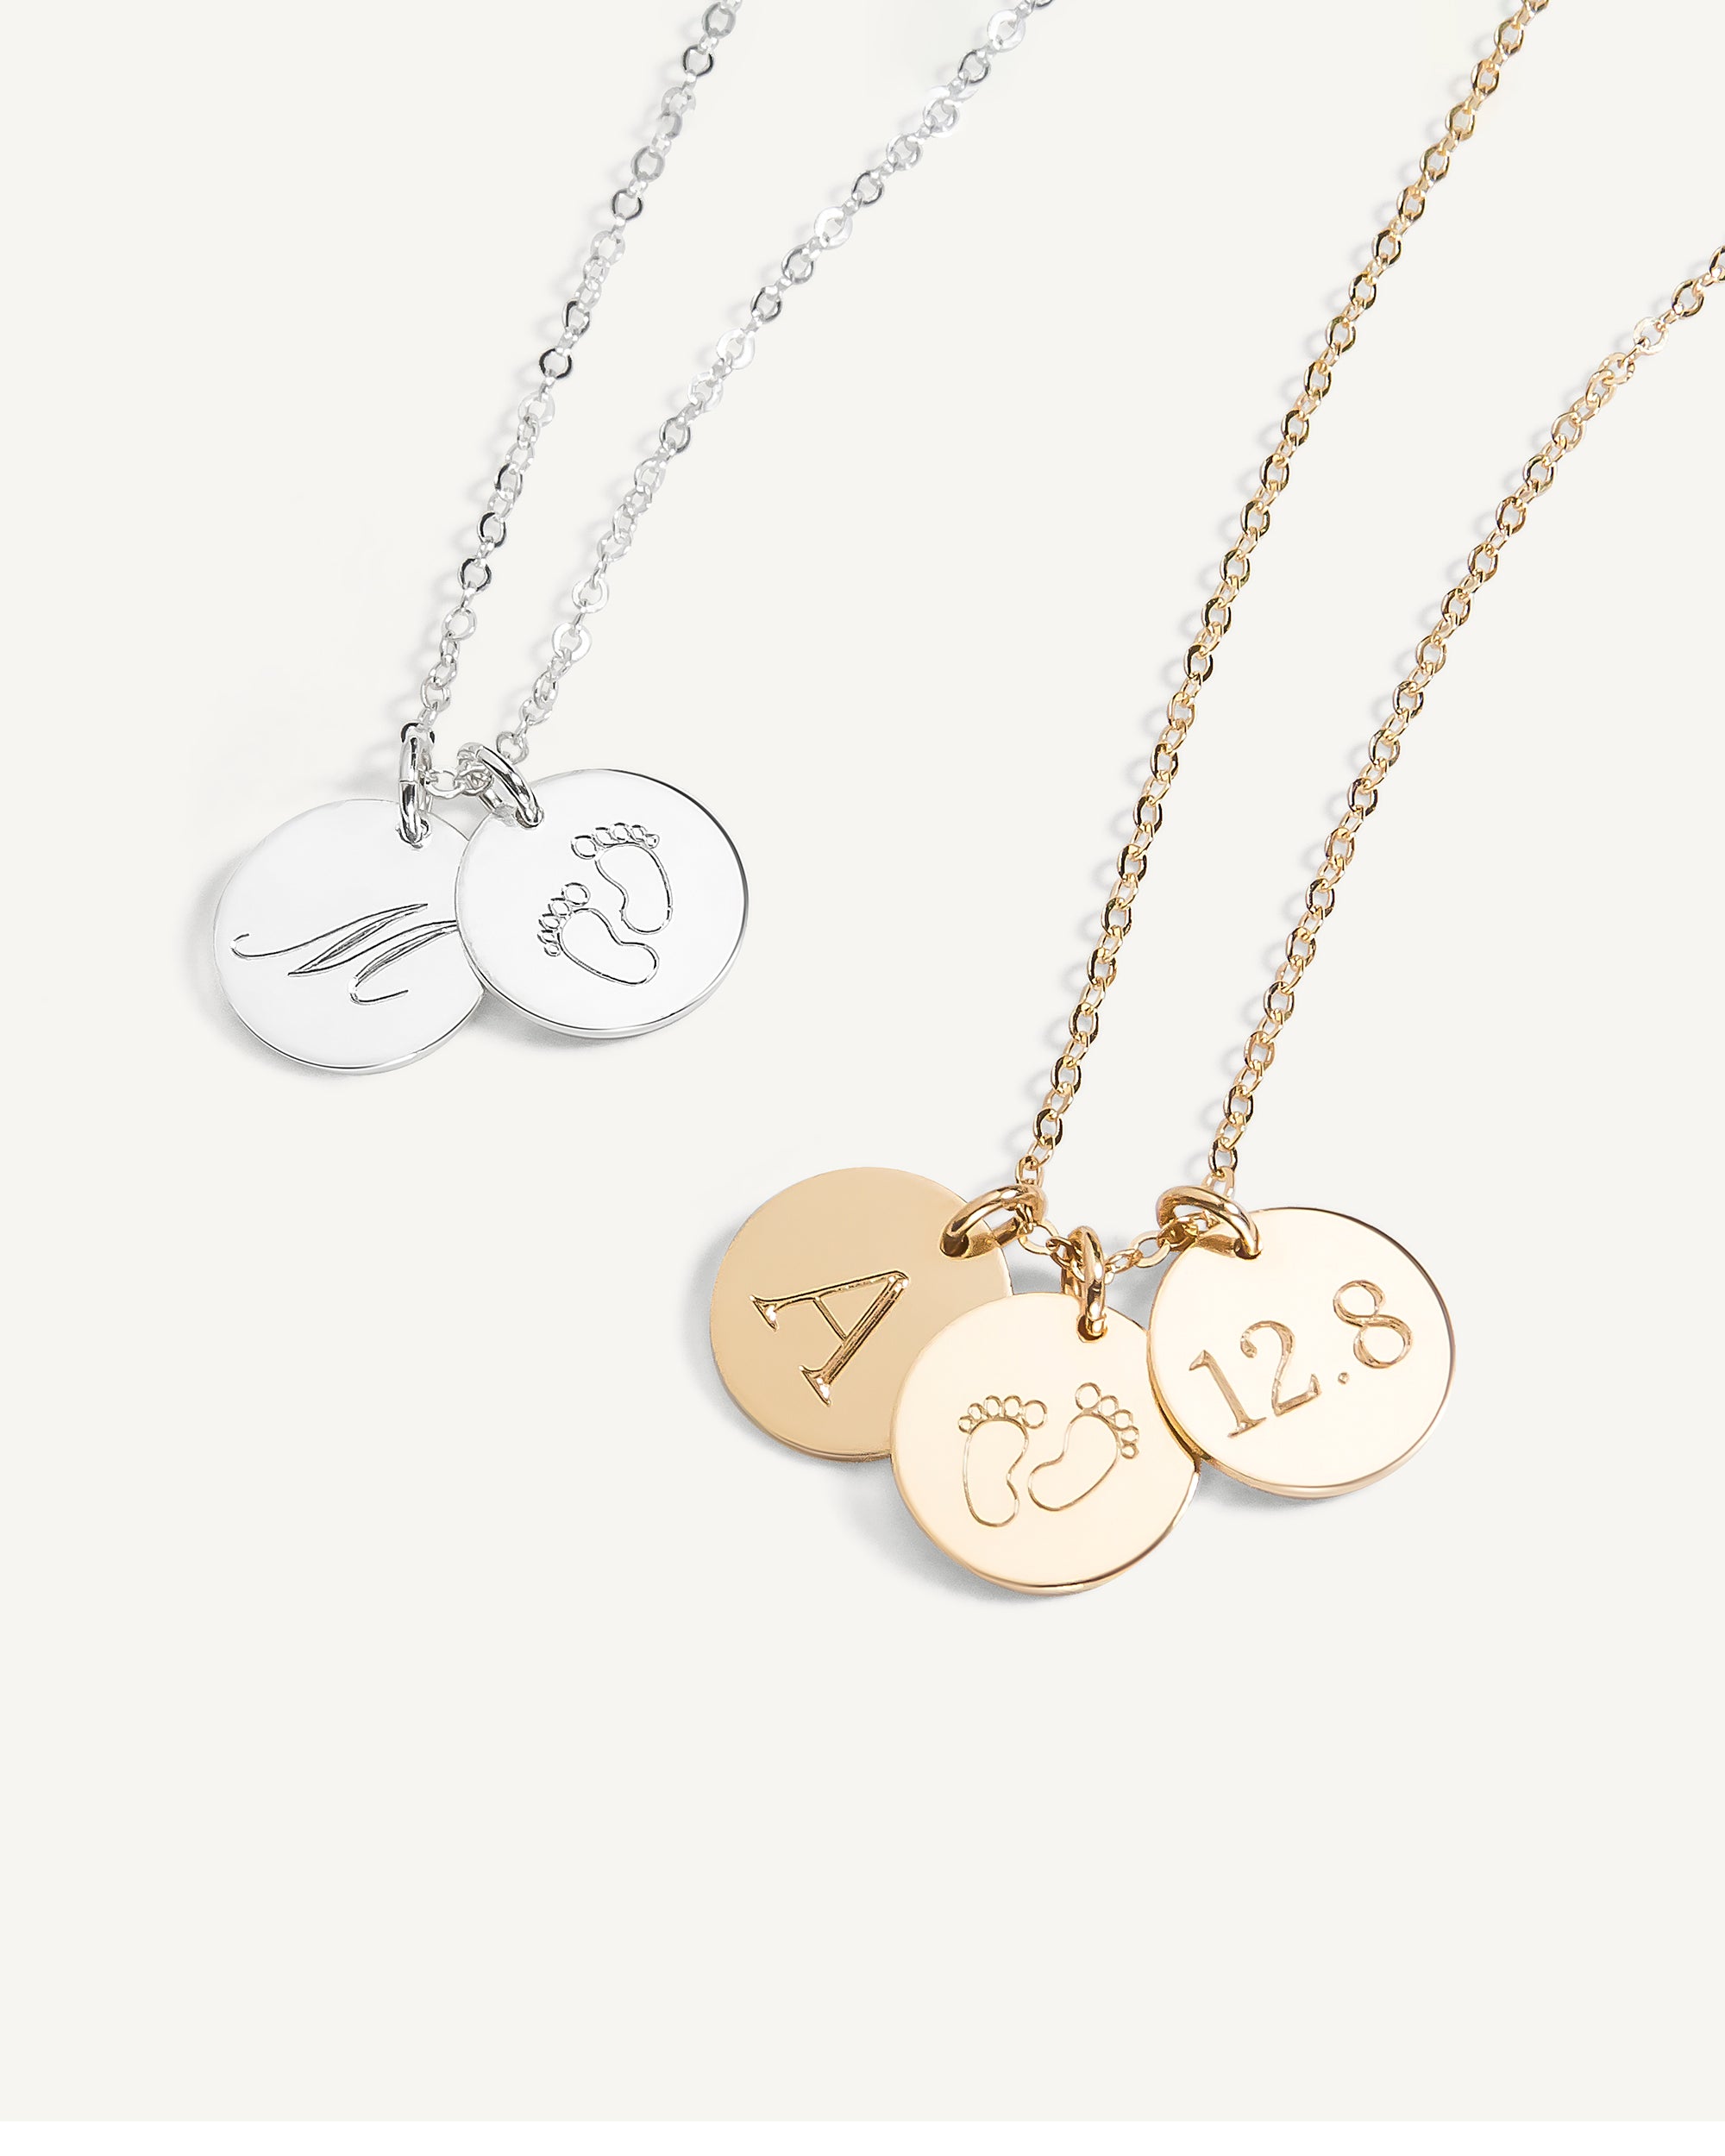 Personalized Disc Initial Necklace - Dainty Gold/Silver/Rose Gold Plated Disc, Delicate Initial Charms Necklace, Hand Stamp, Bridesmaid and Wedding